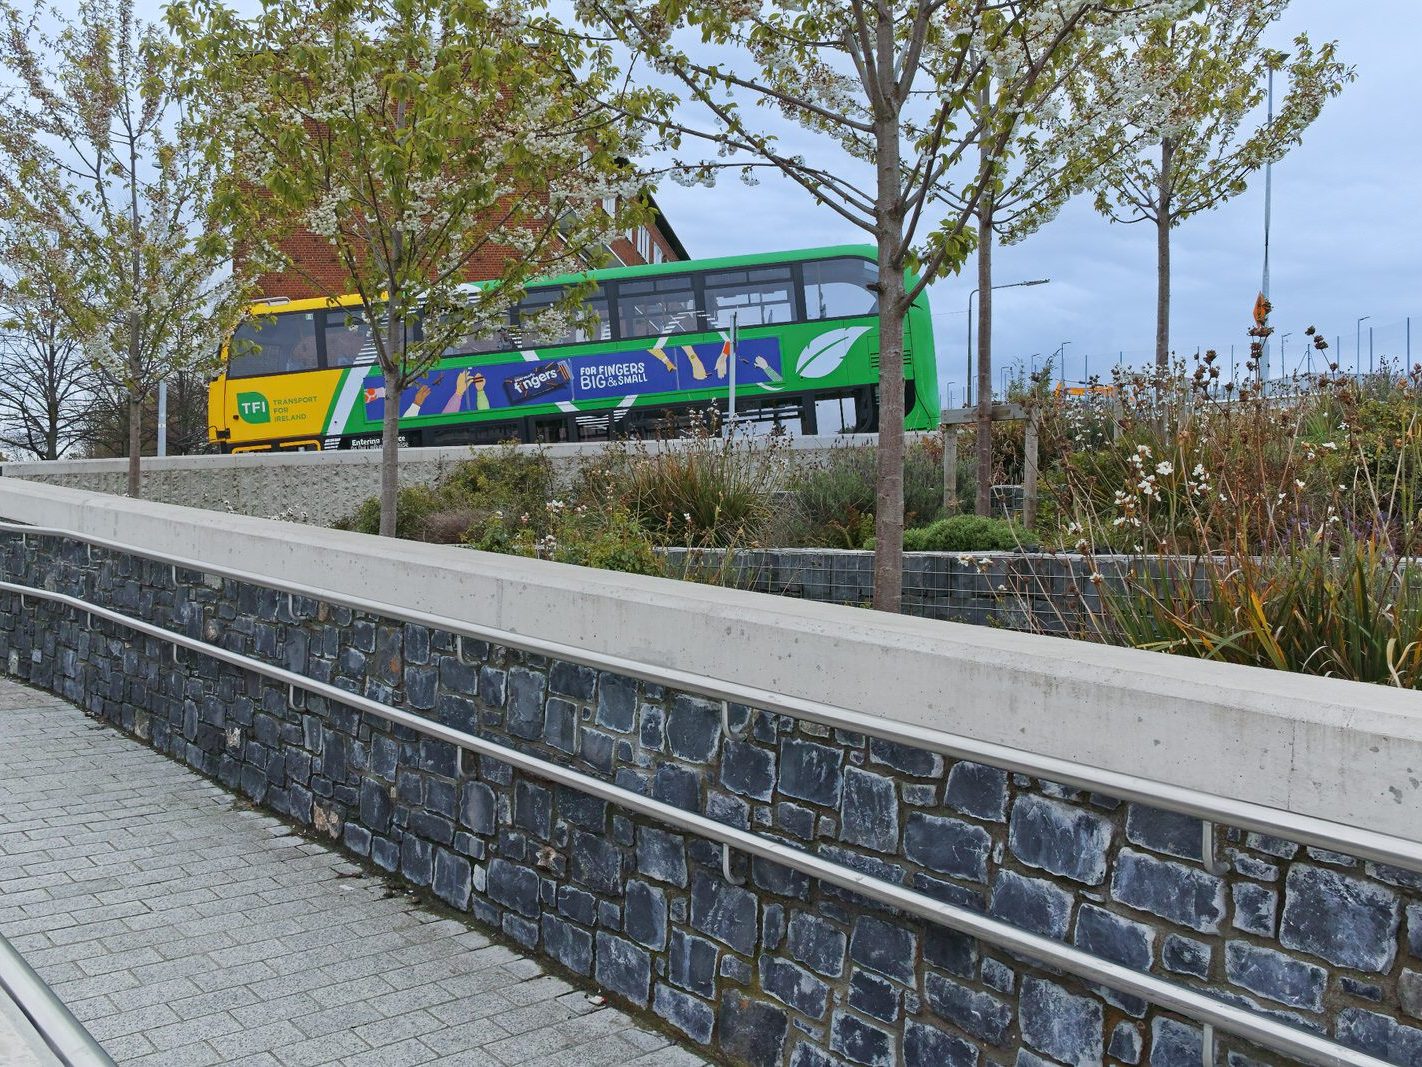 LUAS TRAM STOP AT BROADSTONE AND THE ENTRANCE TO GRANGEGORMAN UNIVERSITY CAMPUS 009